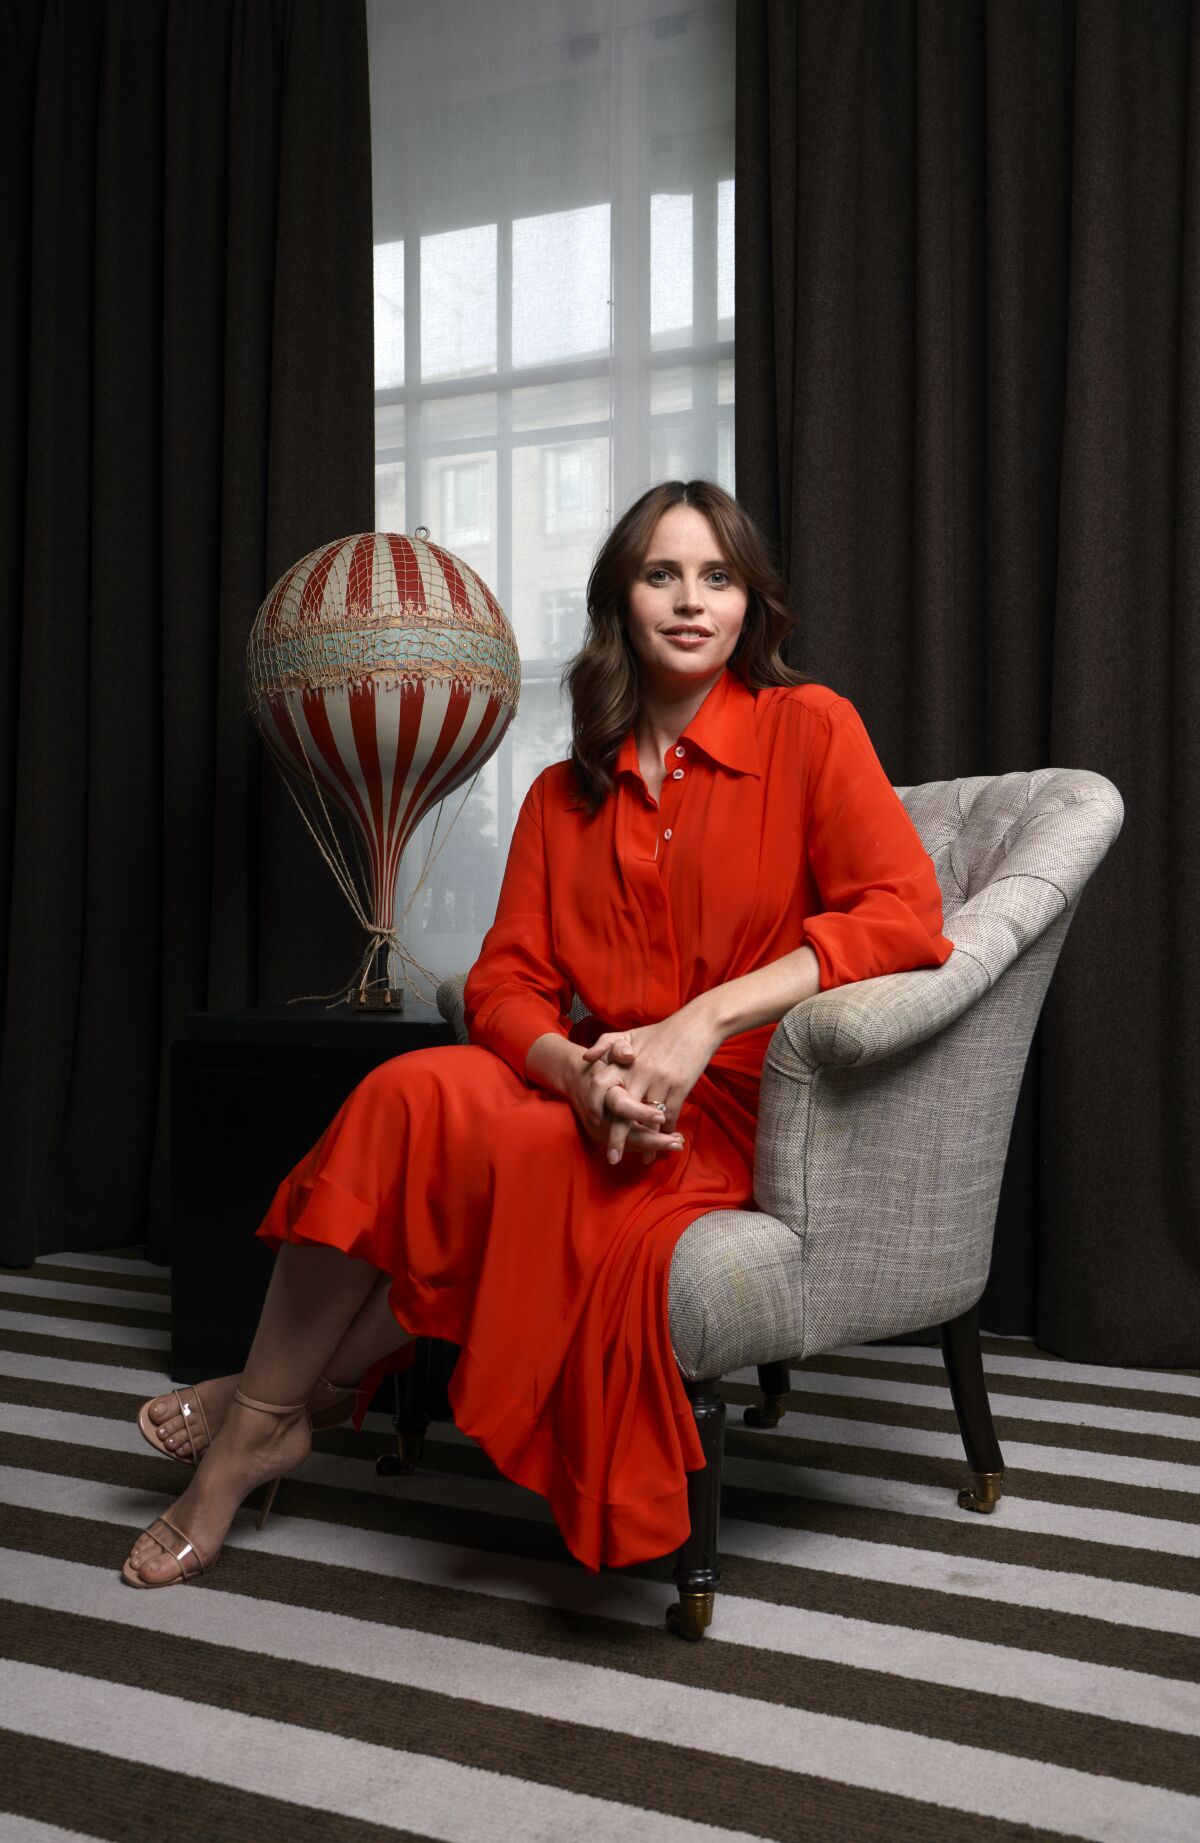 "It’s just ropes and canvas, but the stakes are very high," Felicity Jones says of hot-air ballooning, depicted in “The Aeronauts.” She sits next to a model balloon at a press event in London.